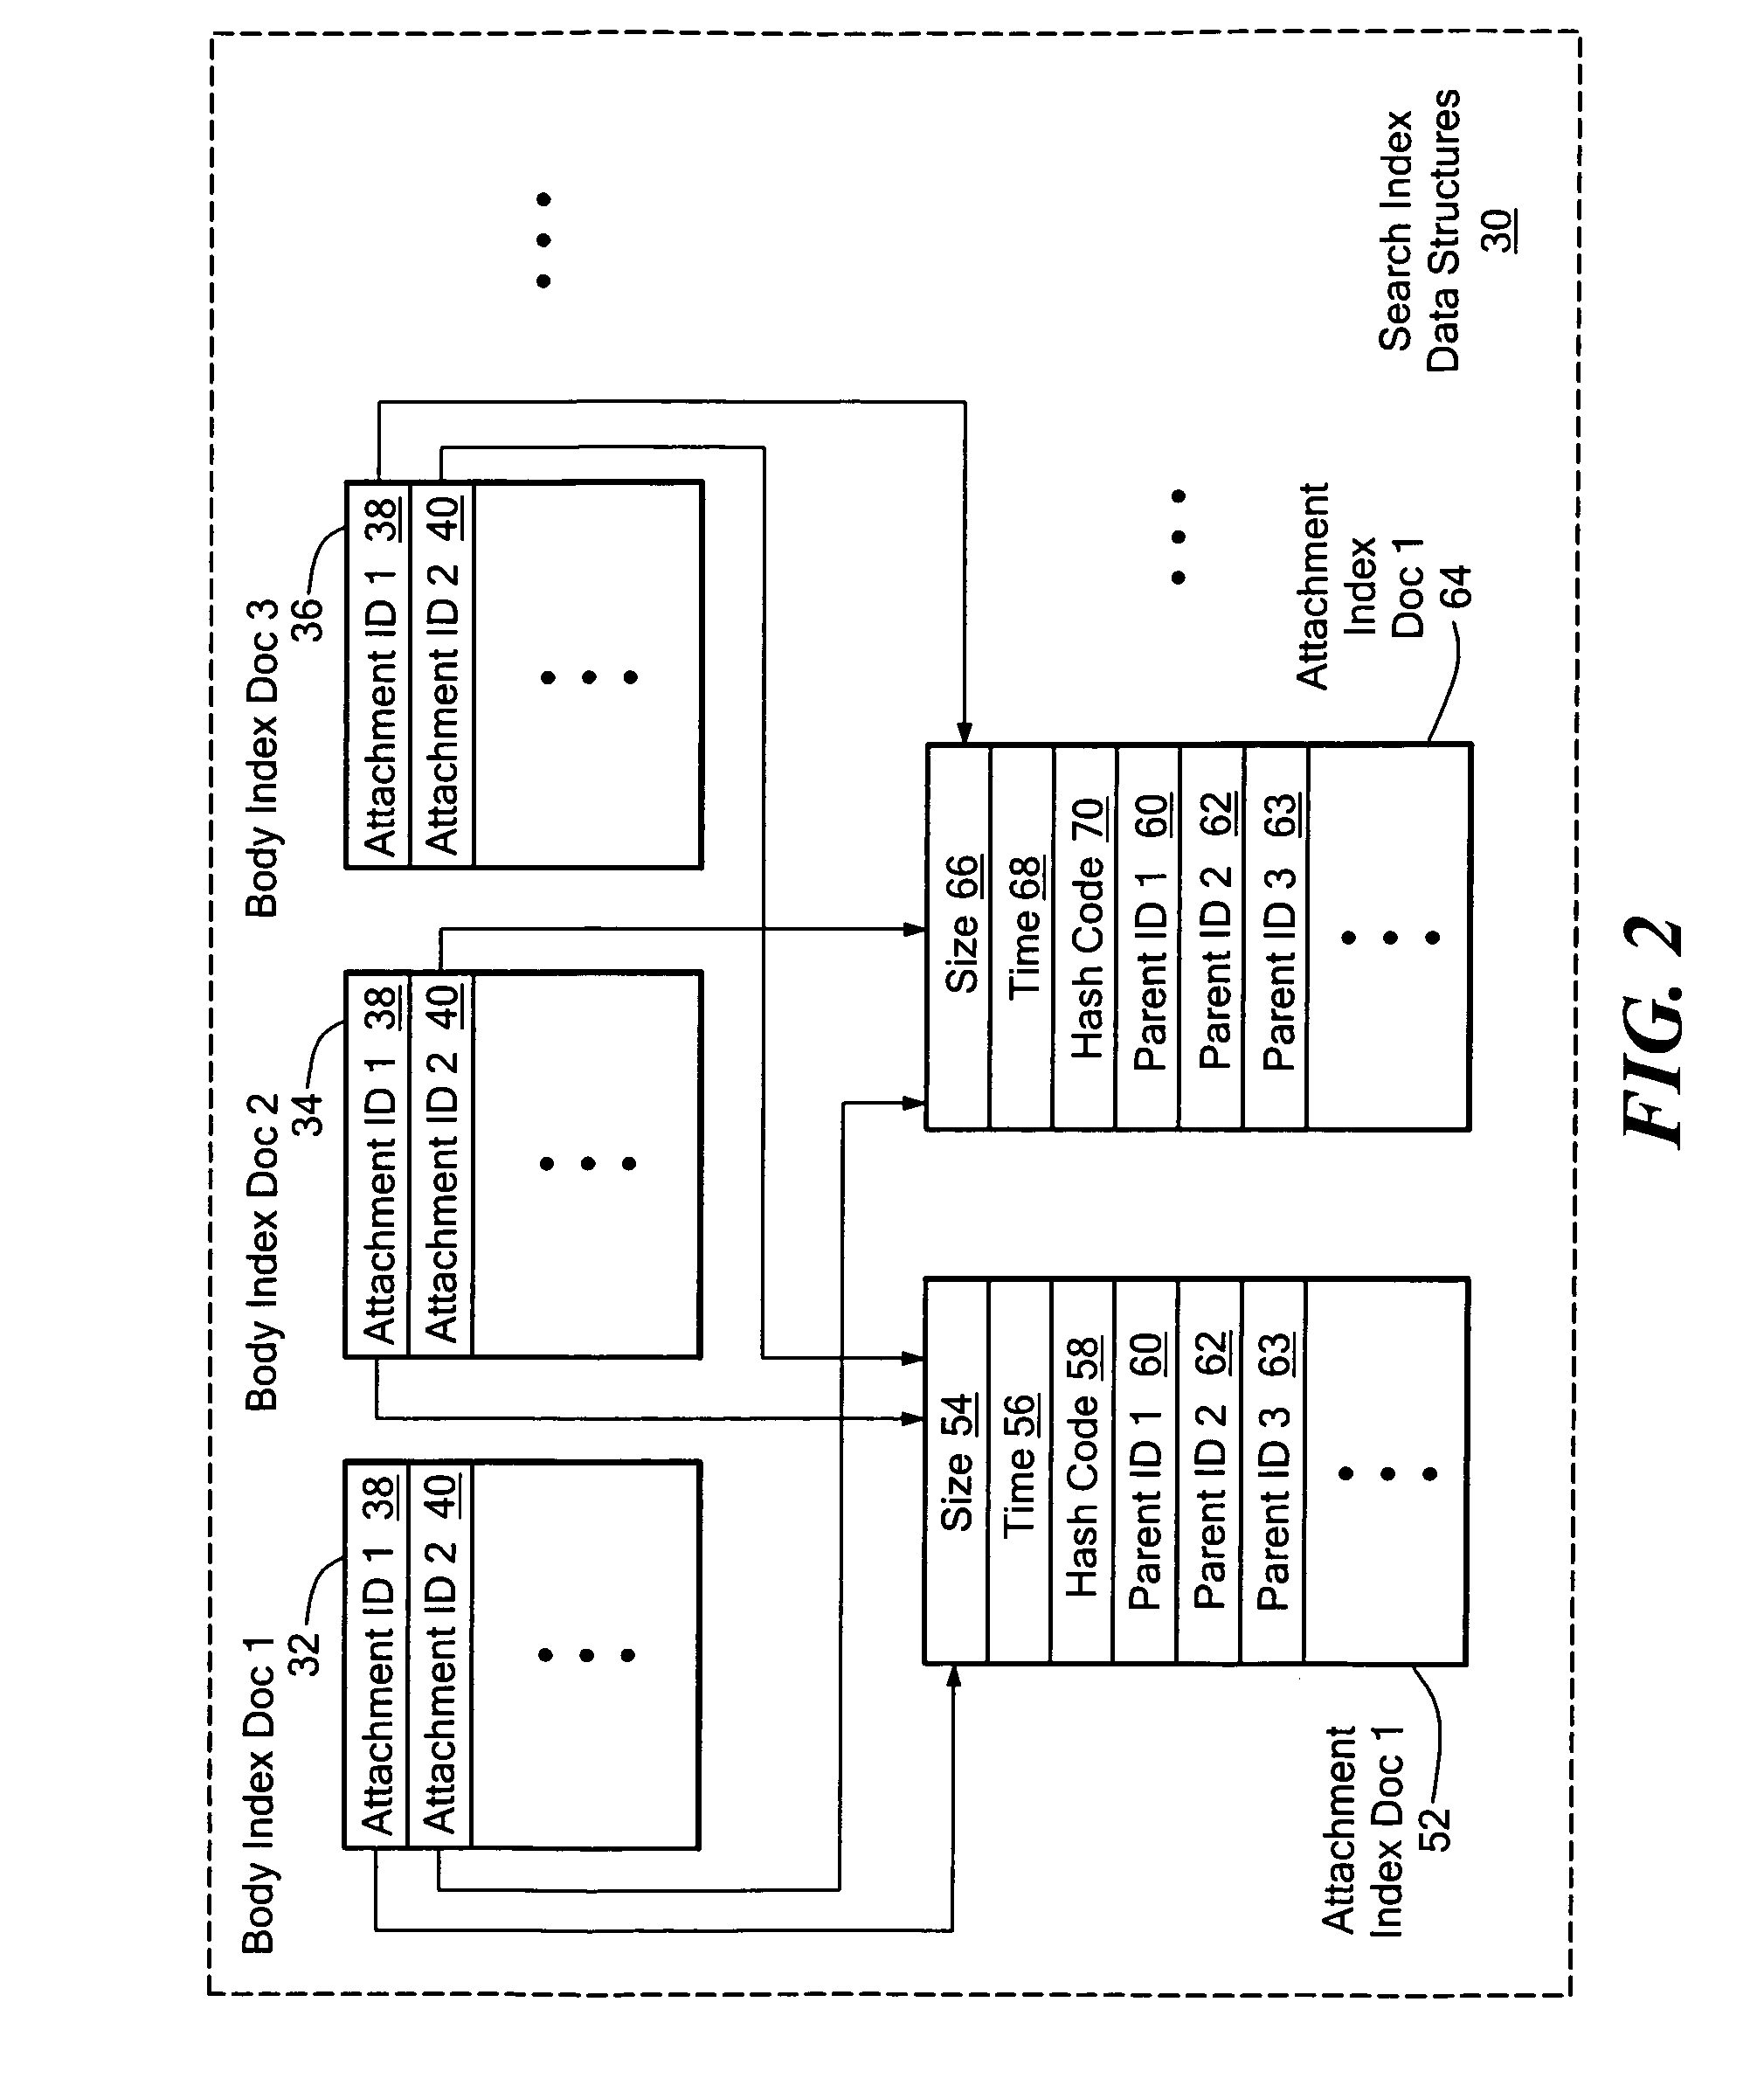 Method and system for providing a search index for an electronic messaging system based on message threads